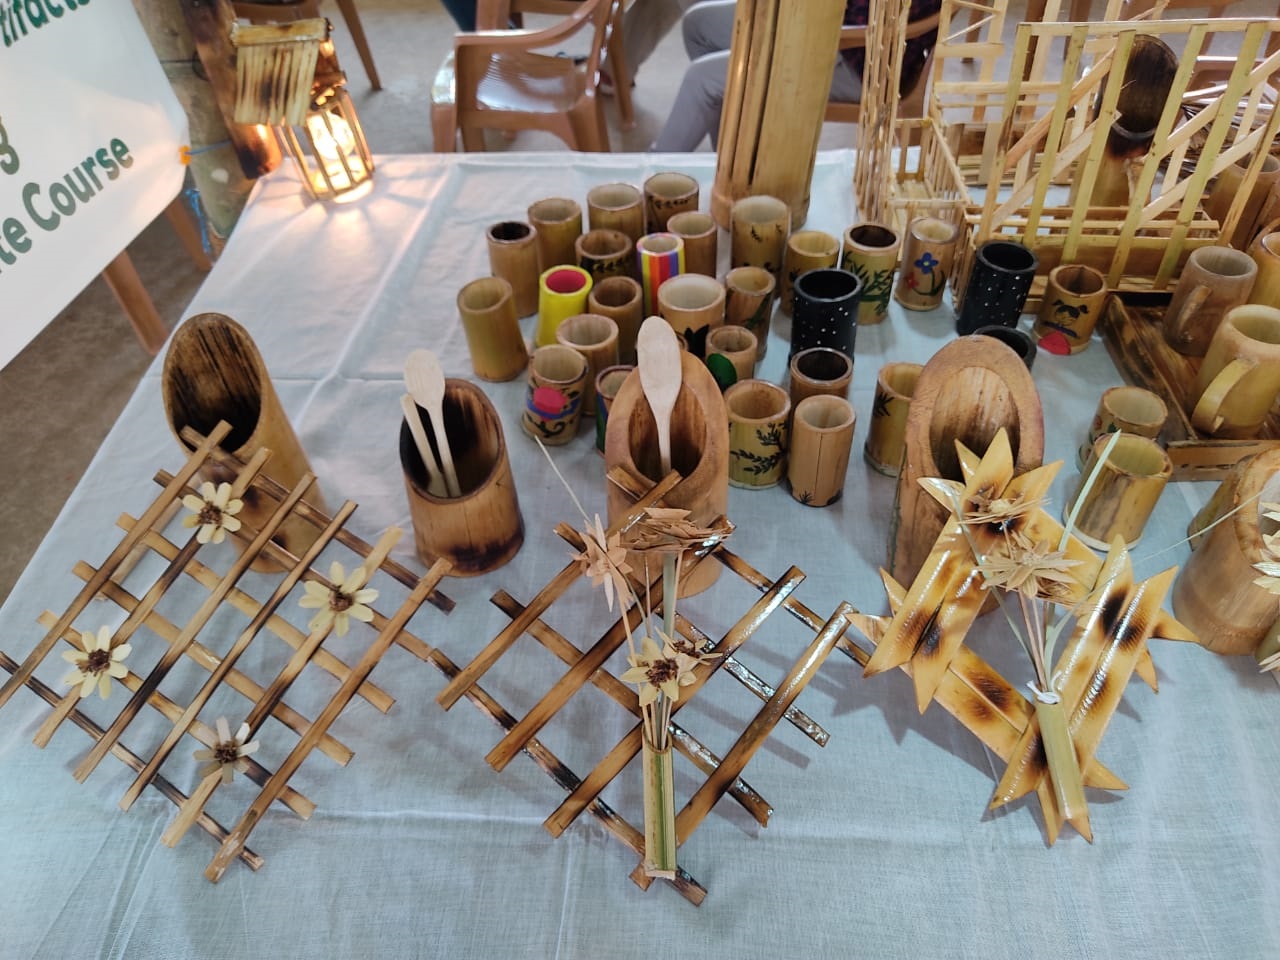 Exhibits of Bamboo Artefacts made during GSDP Course